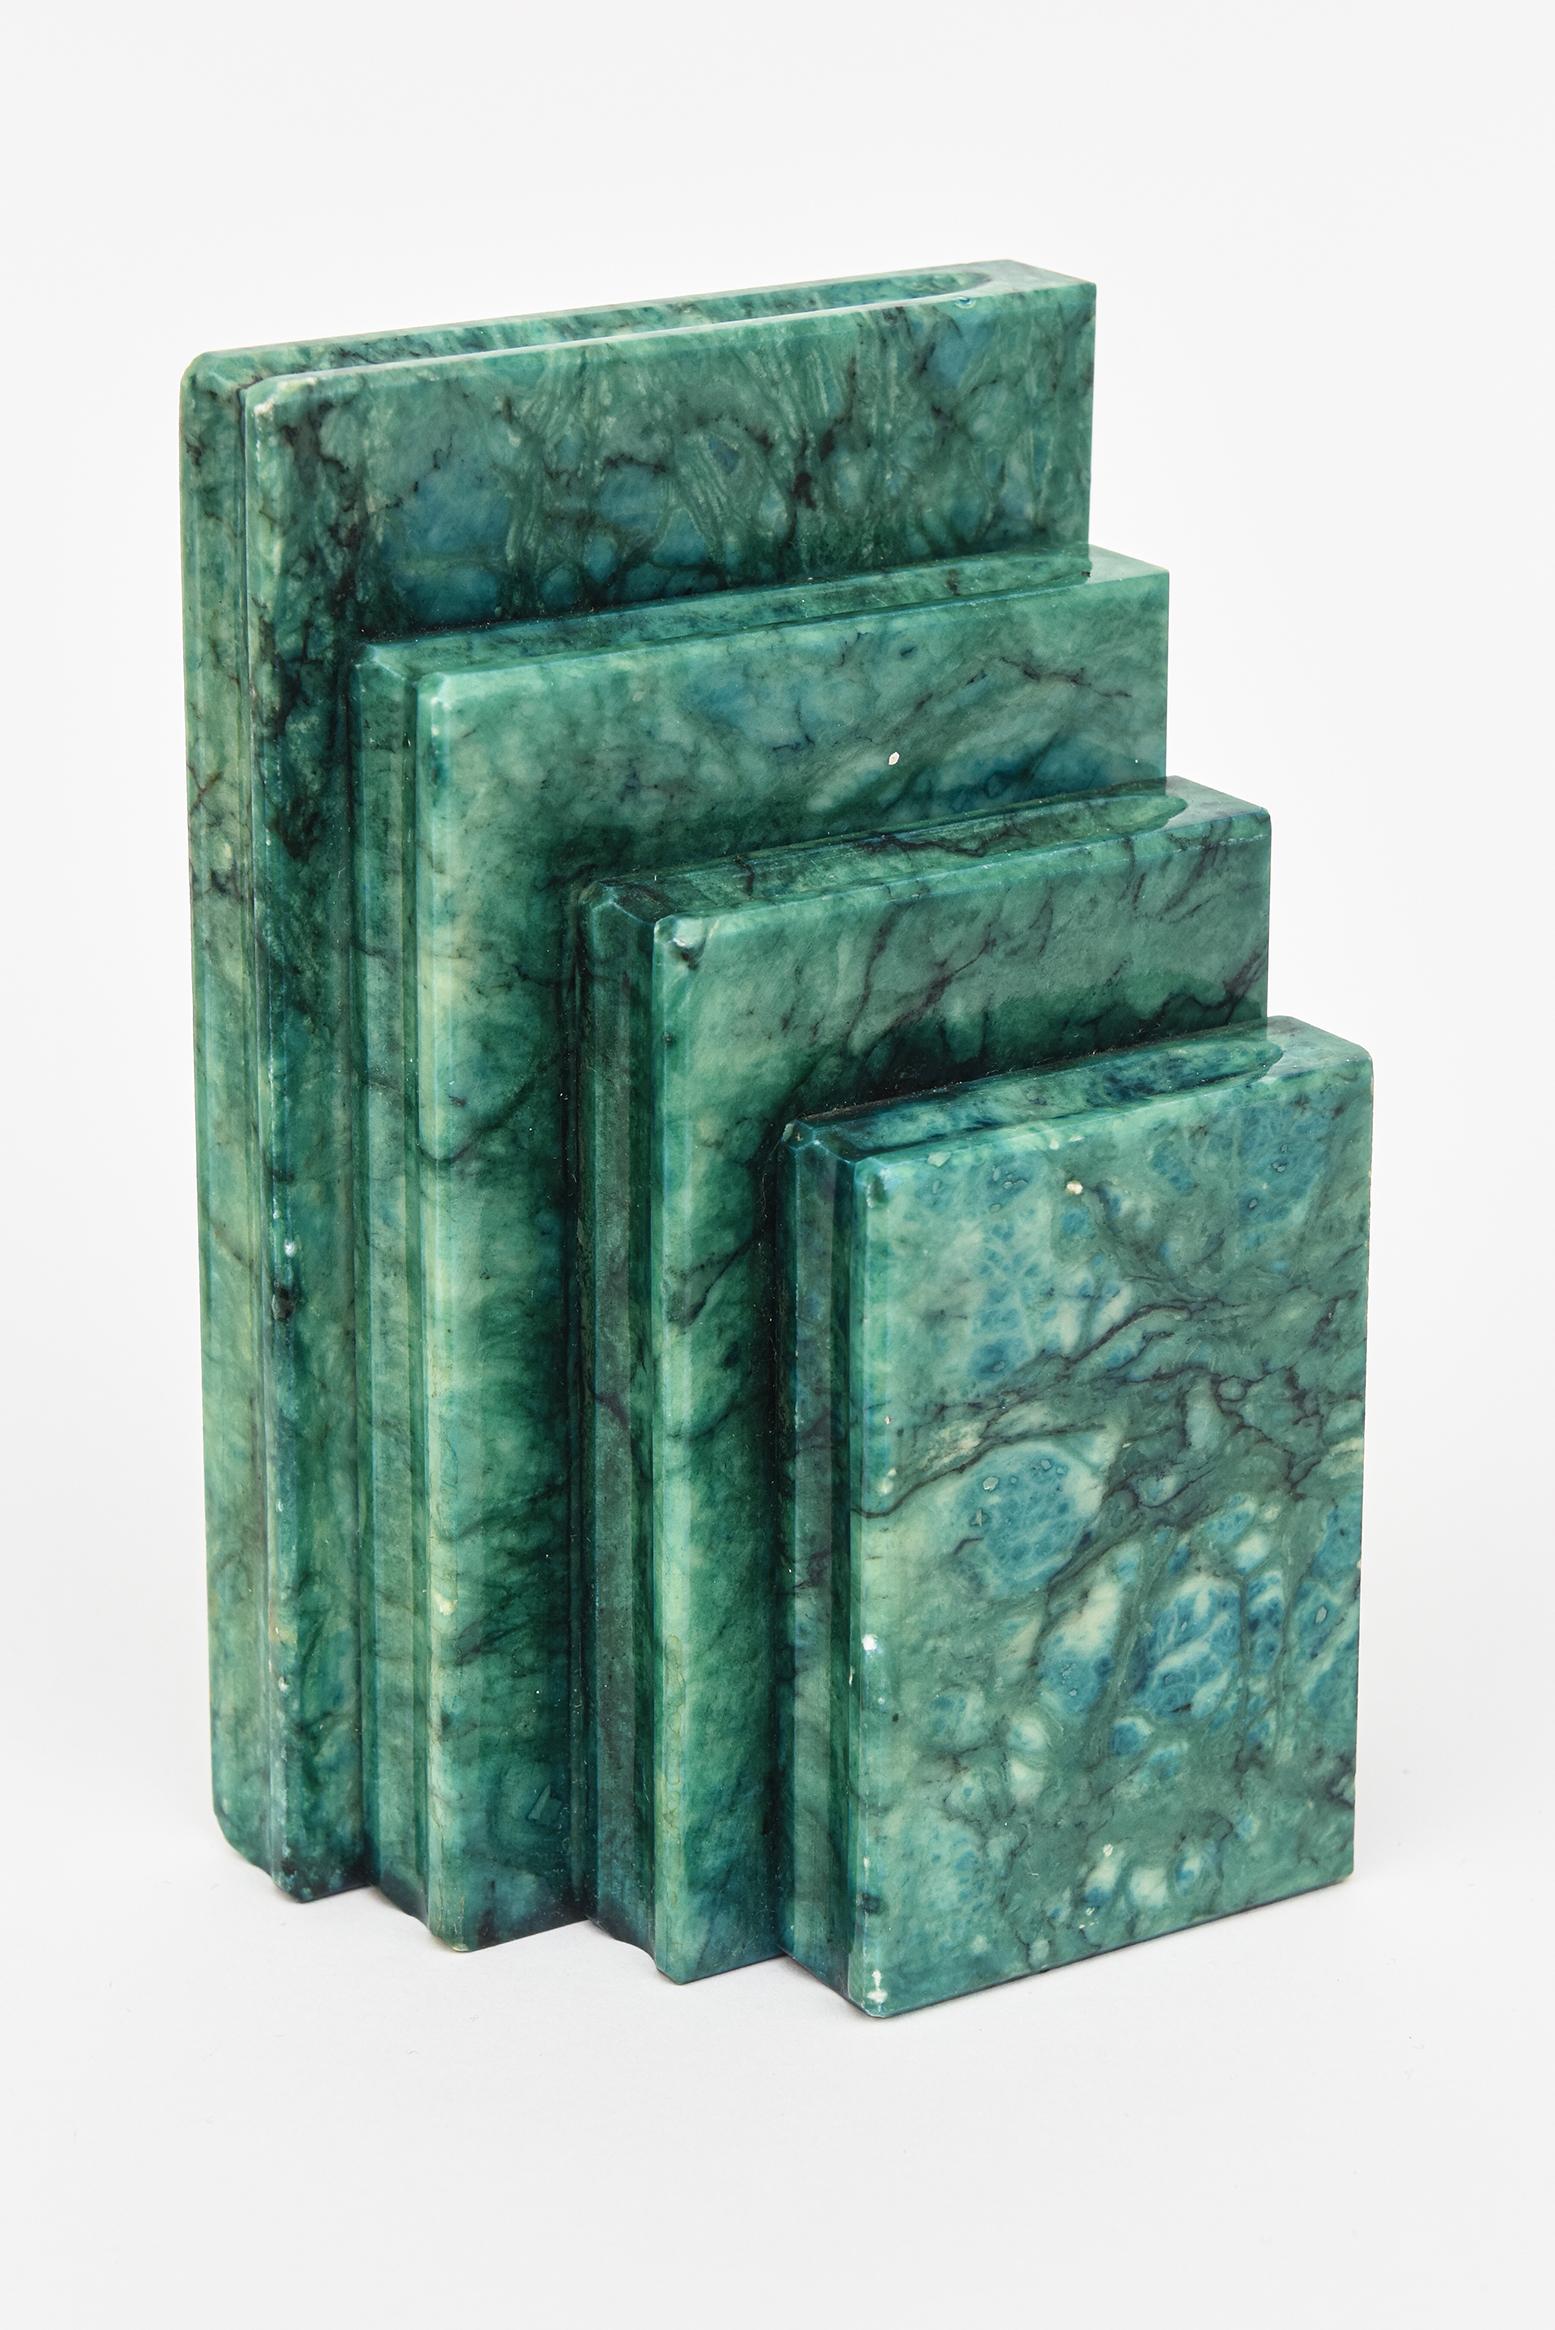 Vintage Italian Turquoise Green Alabaster Book Bookends Pair Of 3